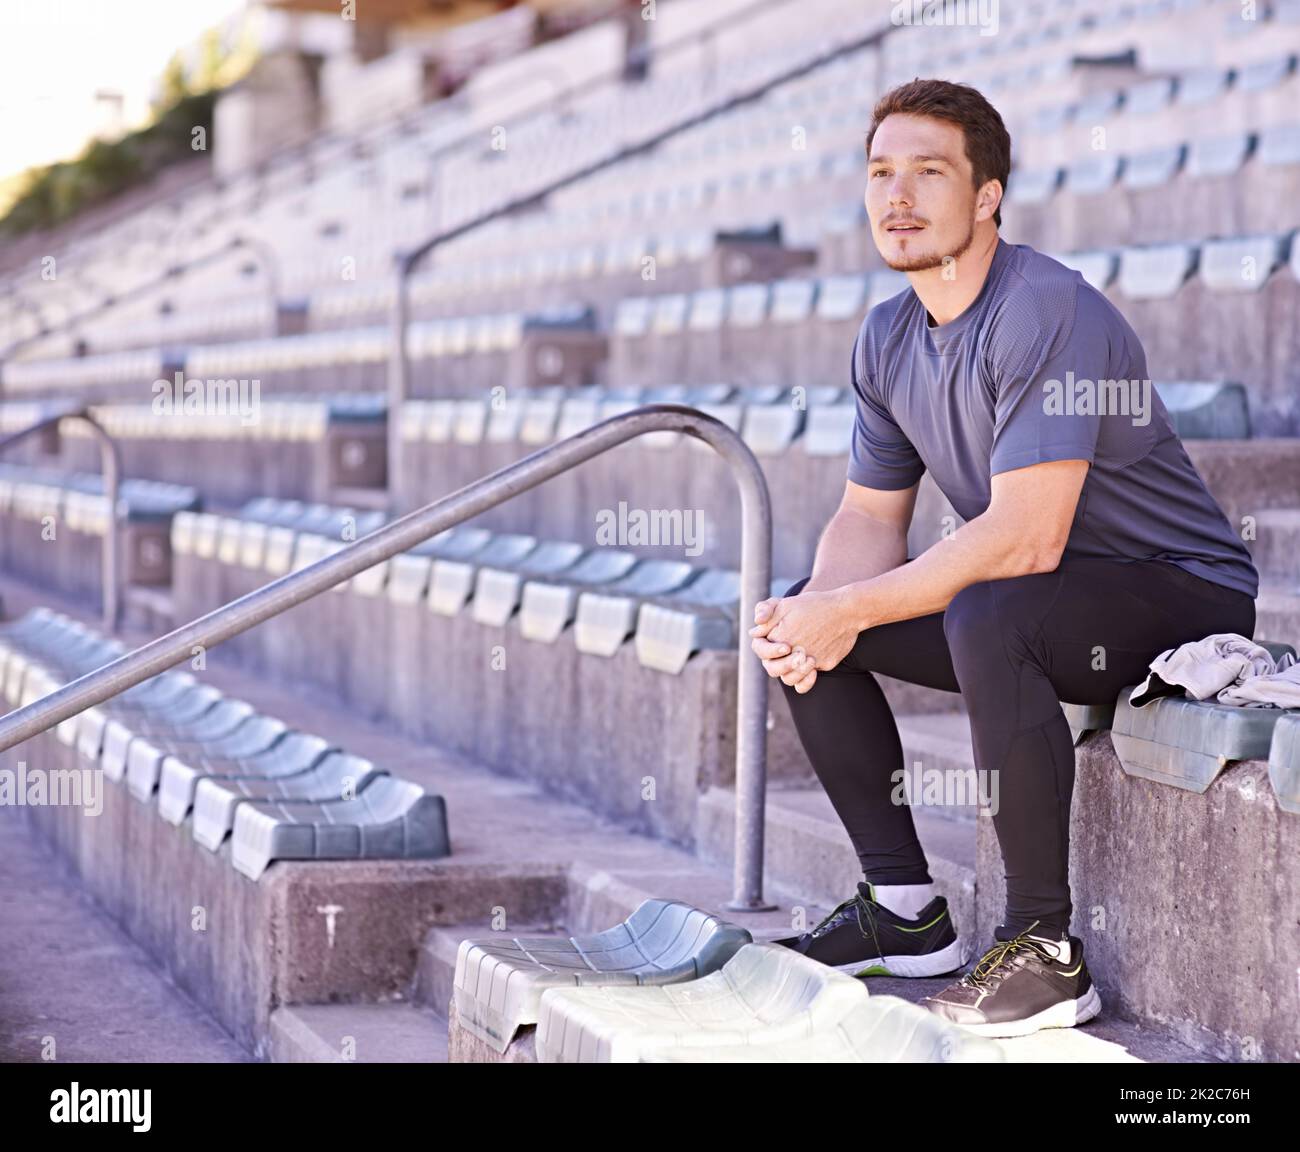 Taking it all in. Shot of a handsome young man sitting in the stands at an athletics arena. Stock Photo